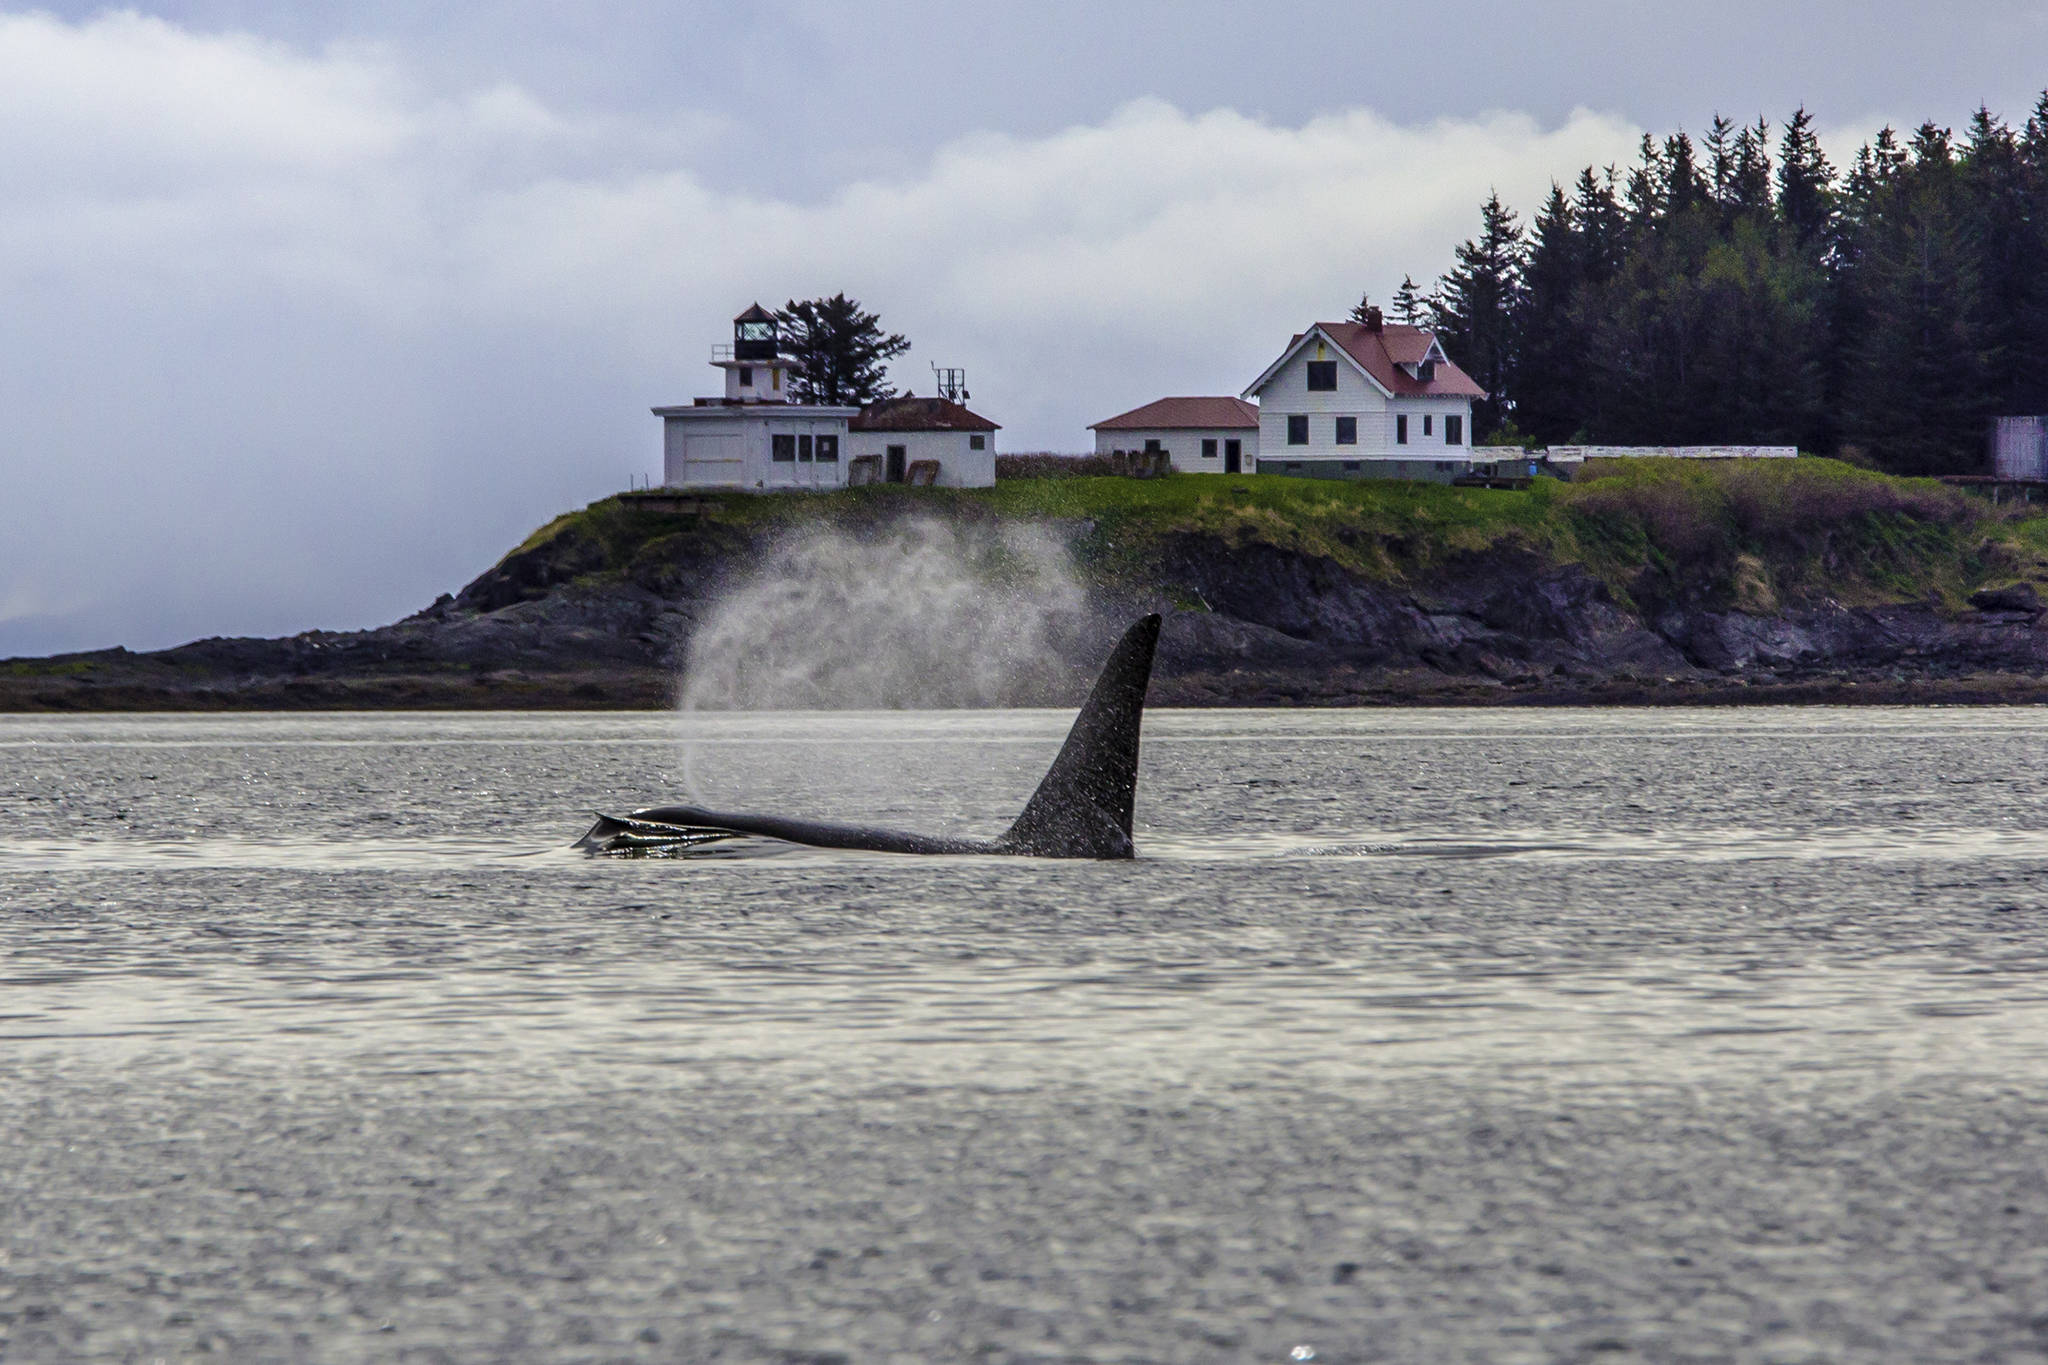 An orca sends mist into the air near Point Retreat in Southern Lynn Canal. (Courtesy Photo | Jack Beedle)